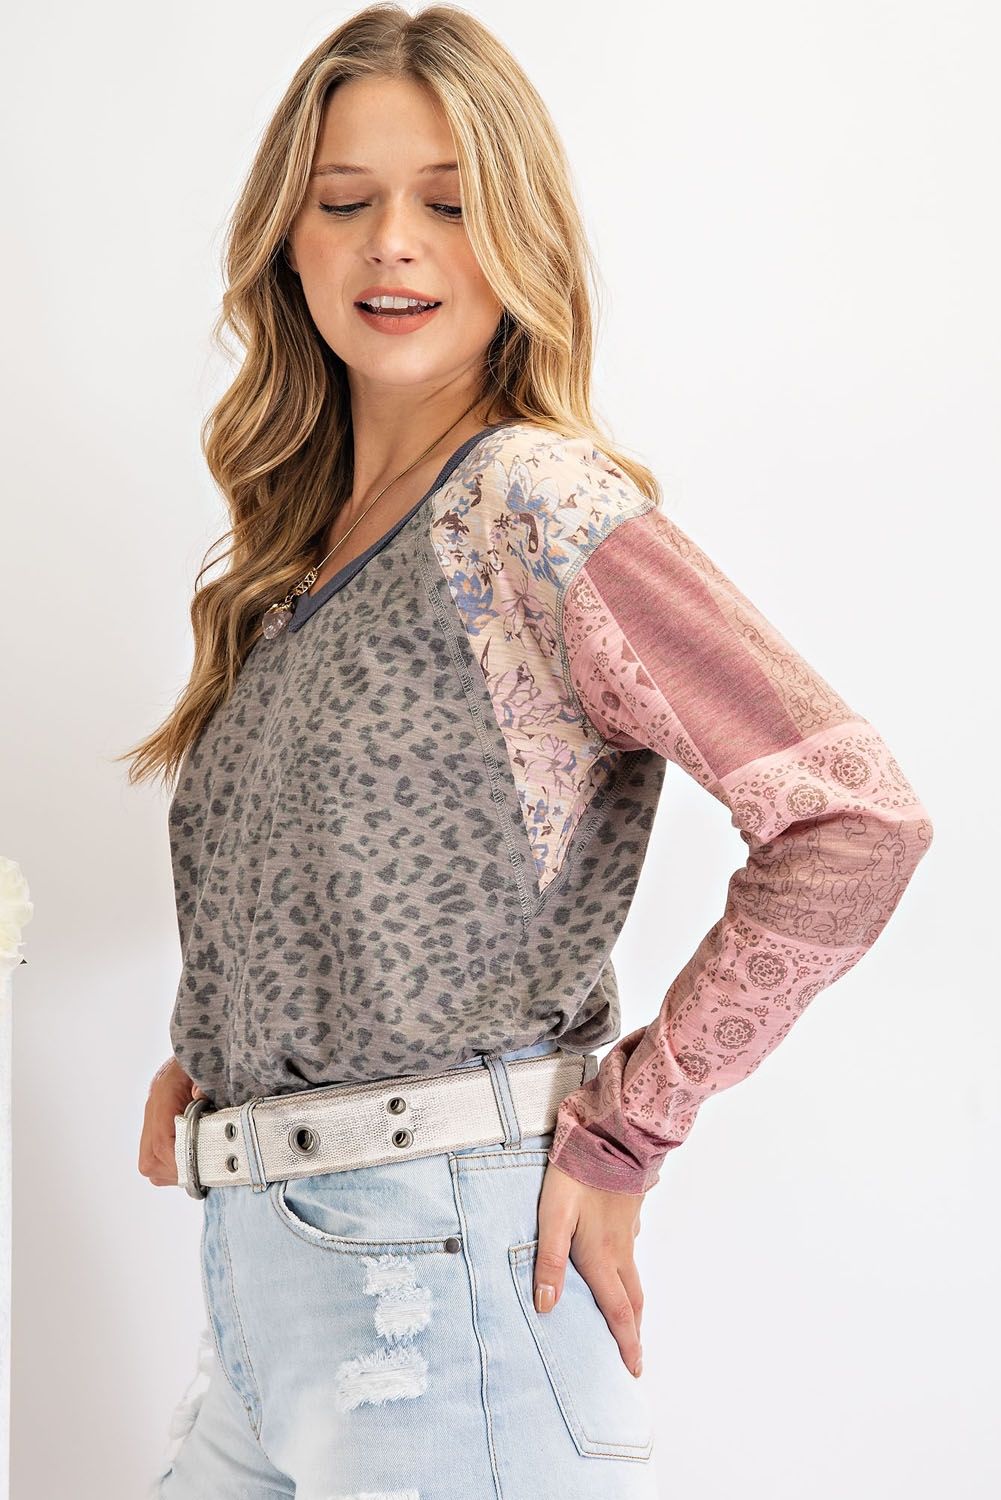 Dream-in animal print mix tribal sleeves V-neck knit top  Ivy and Pearl Boutique   